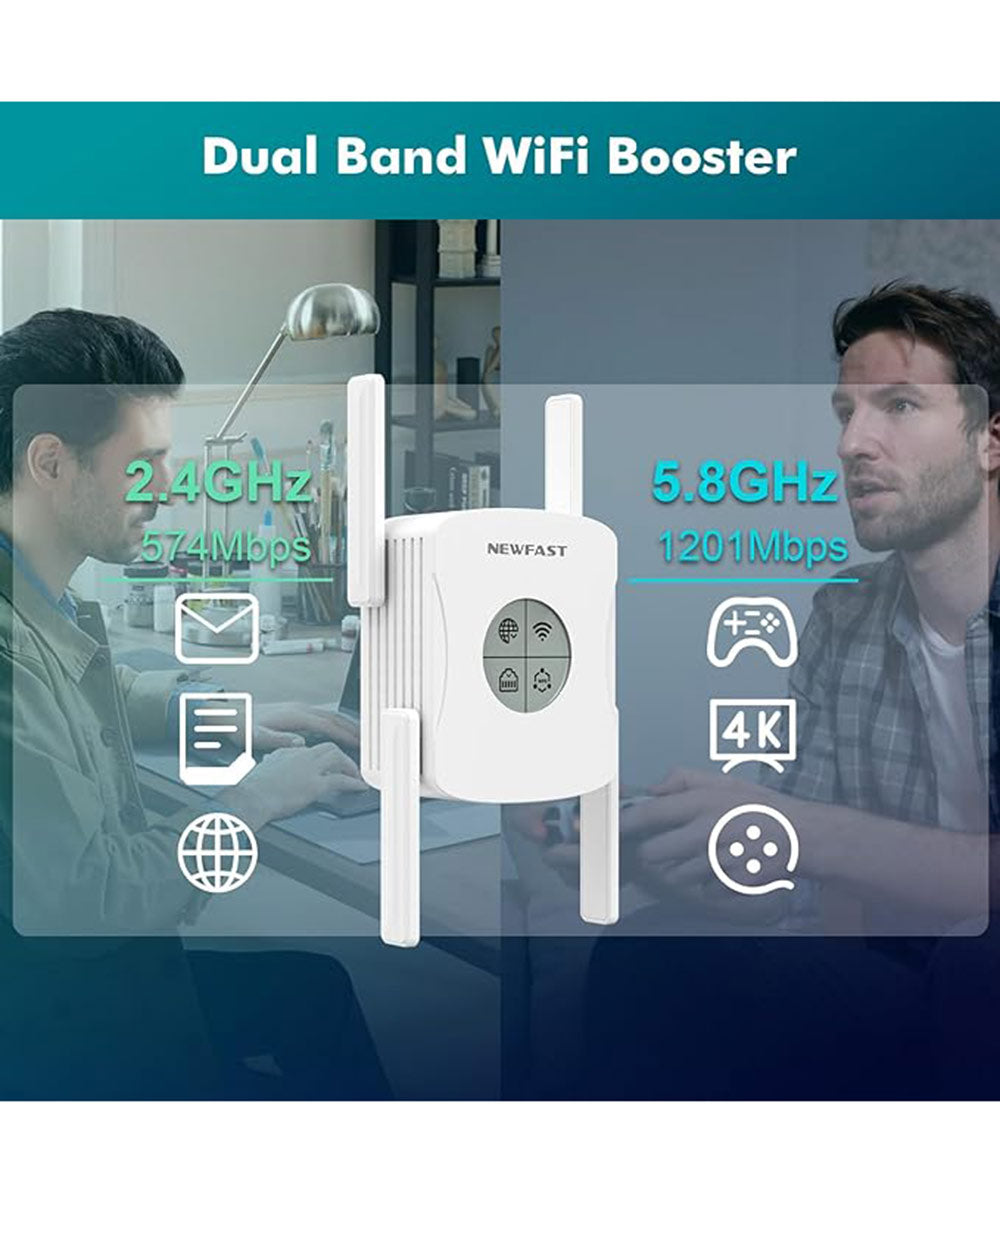 Newfast Wifi 6 Range Extender Dual Band Booster 5 Modes